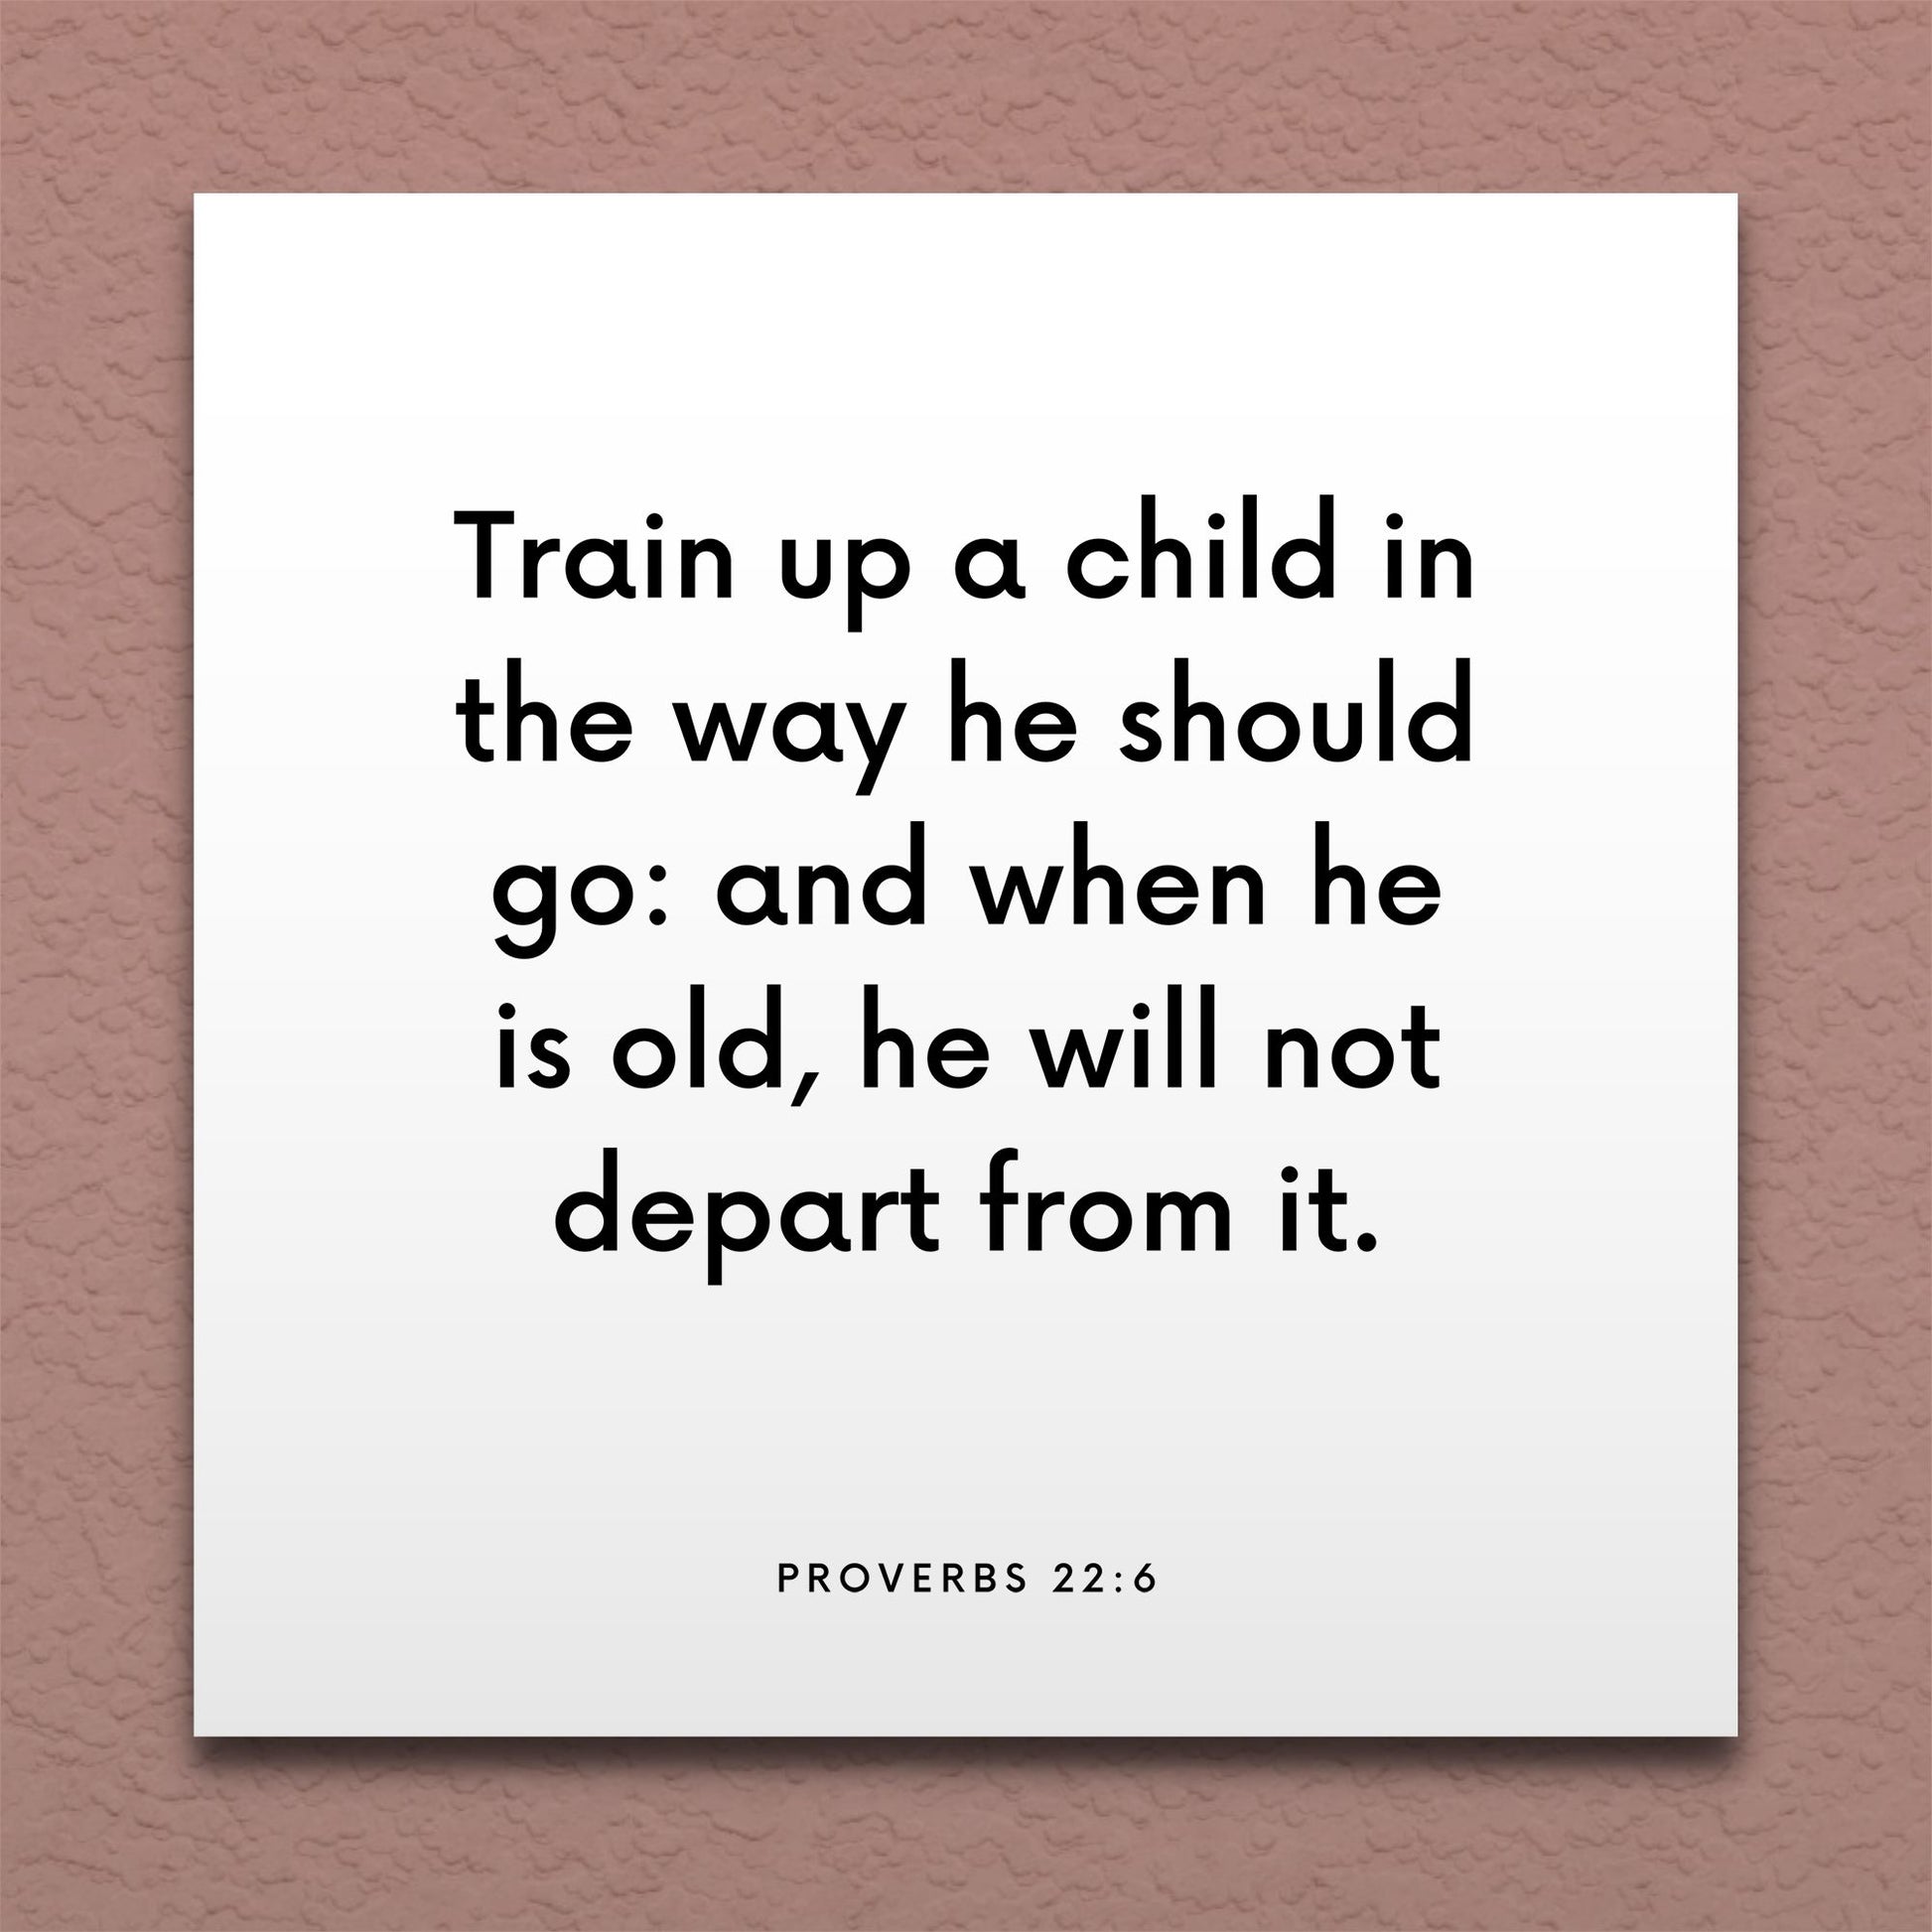 Wall-mounted scripture tile for Proverbs 22:6 - "Train up a child in the way he should go"